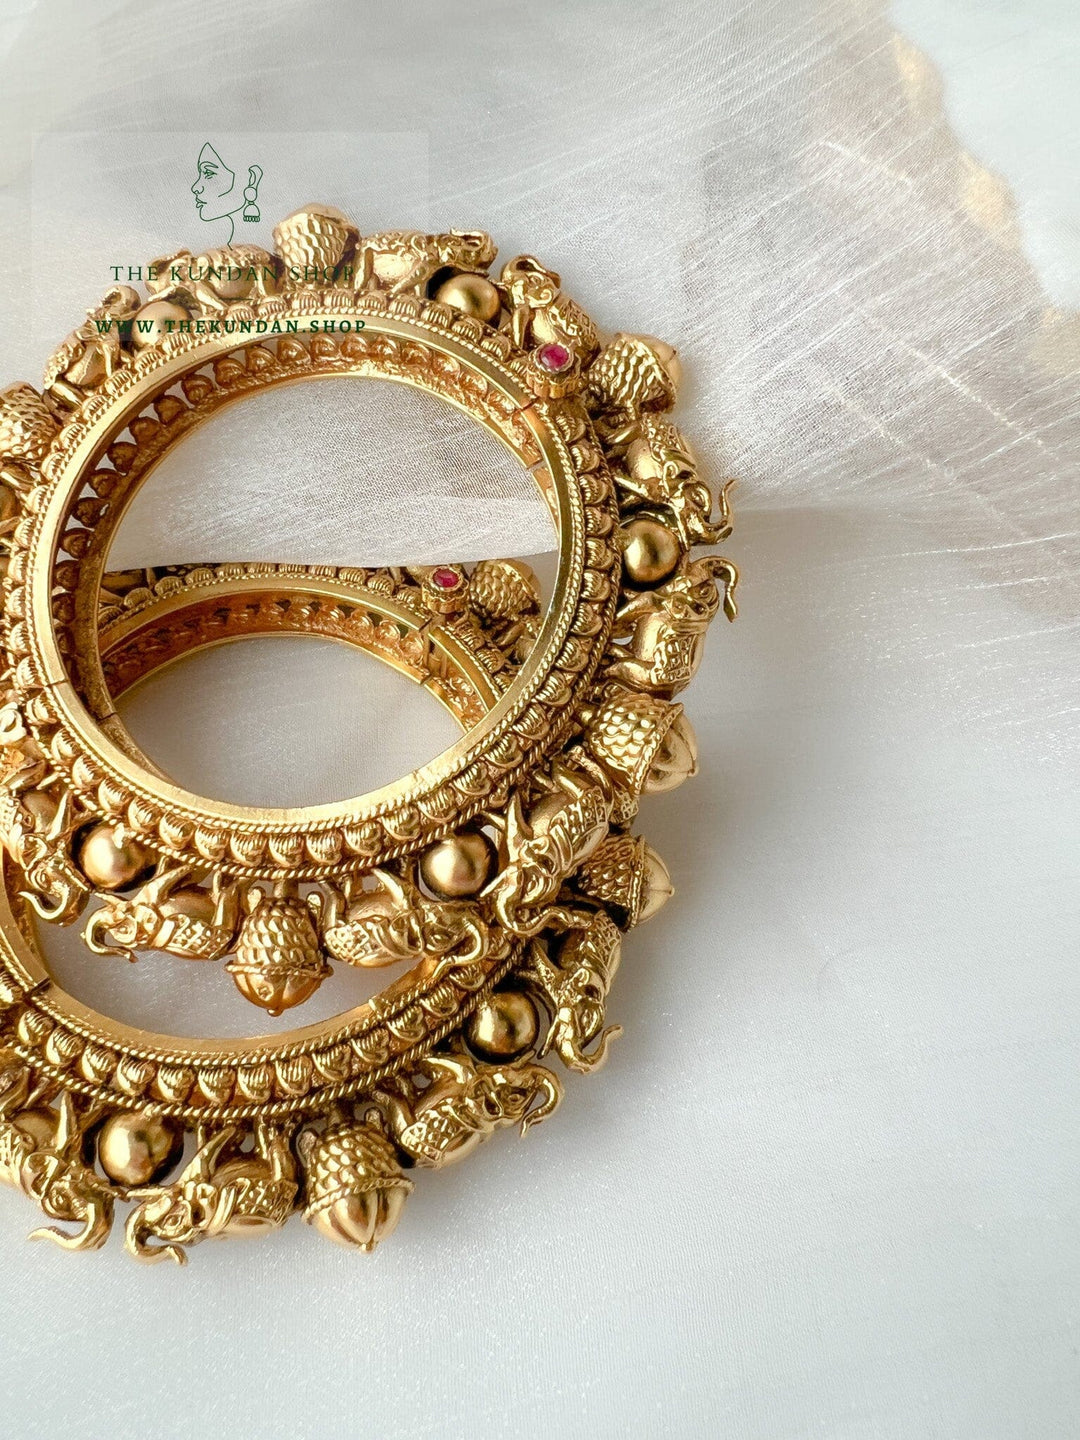 Elephant Pairs in Antique Bangles THE KUNDAN SHOP 